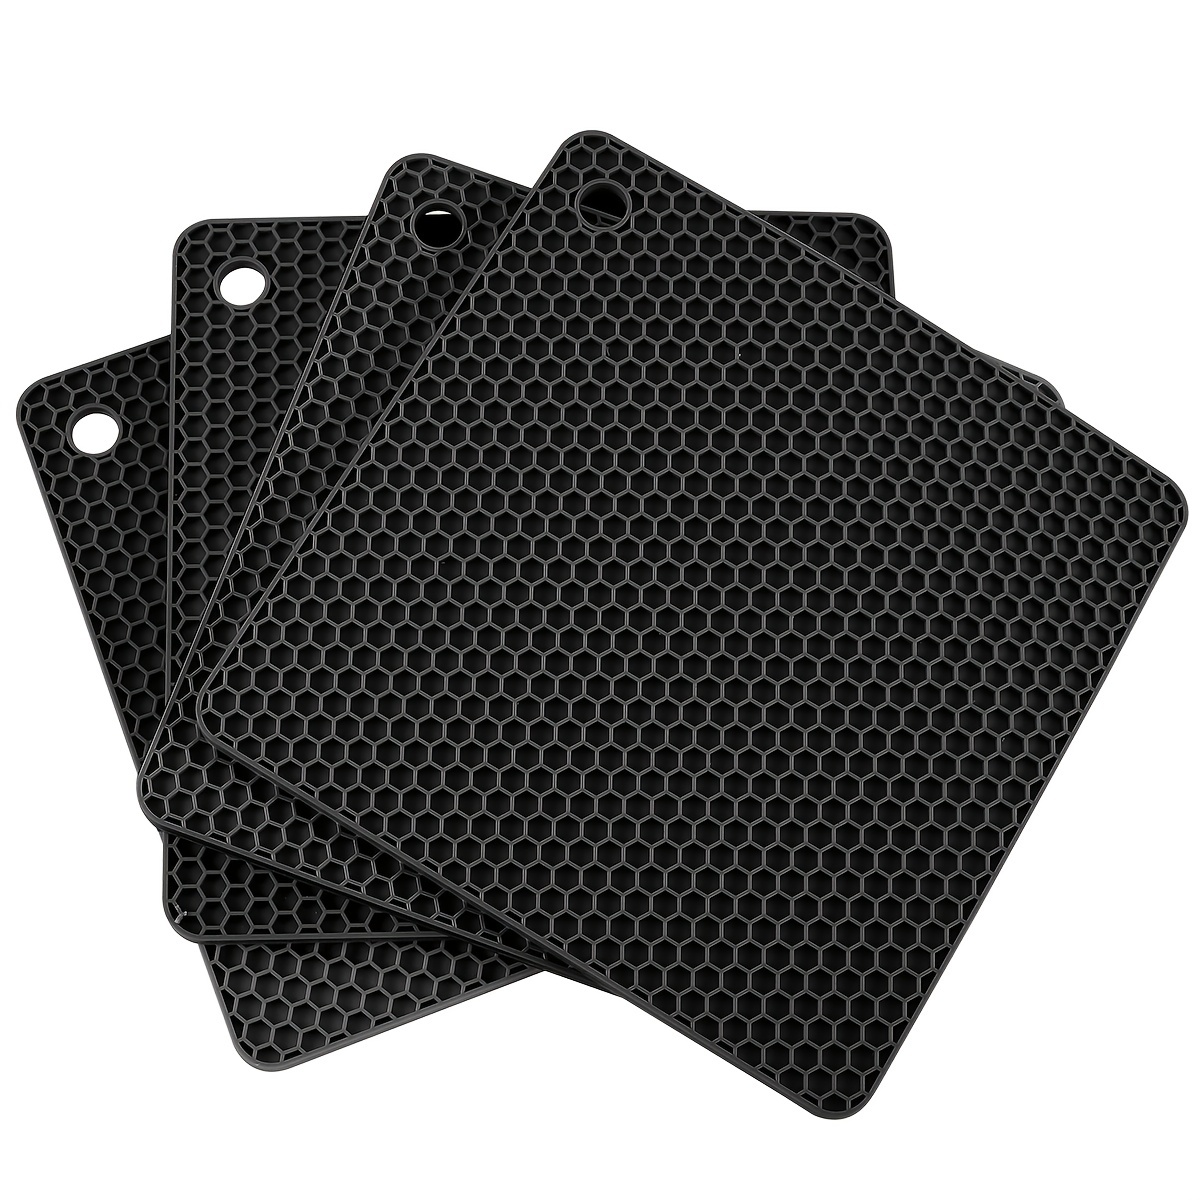 Silicone Pot Pad, Trivet Mat for Countertop, Heat Resistant, Square Table  Placement - Black, 1pc - Foods Co.